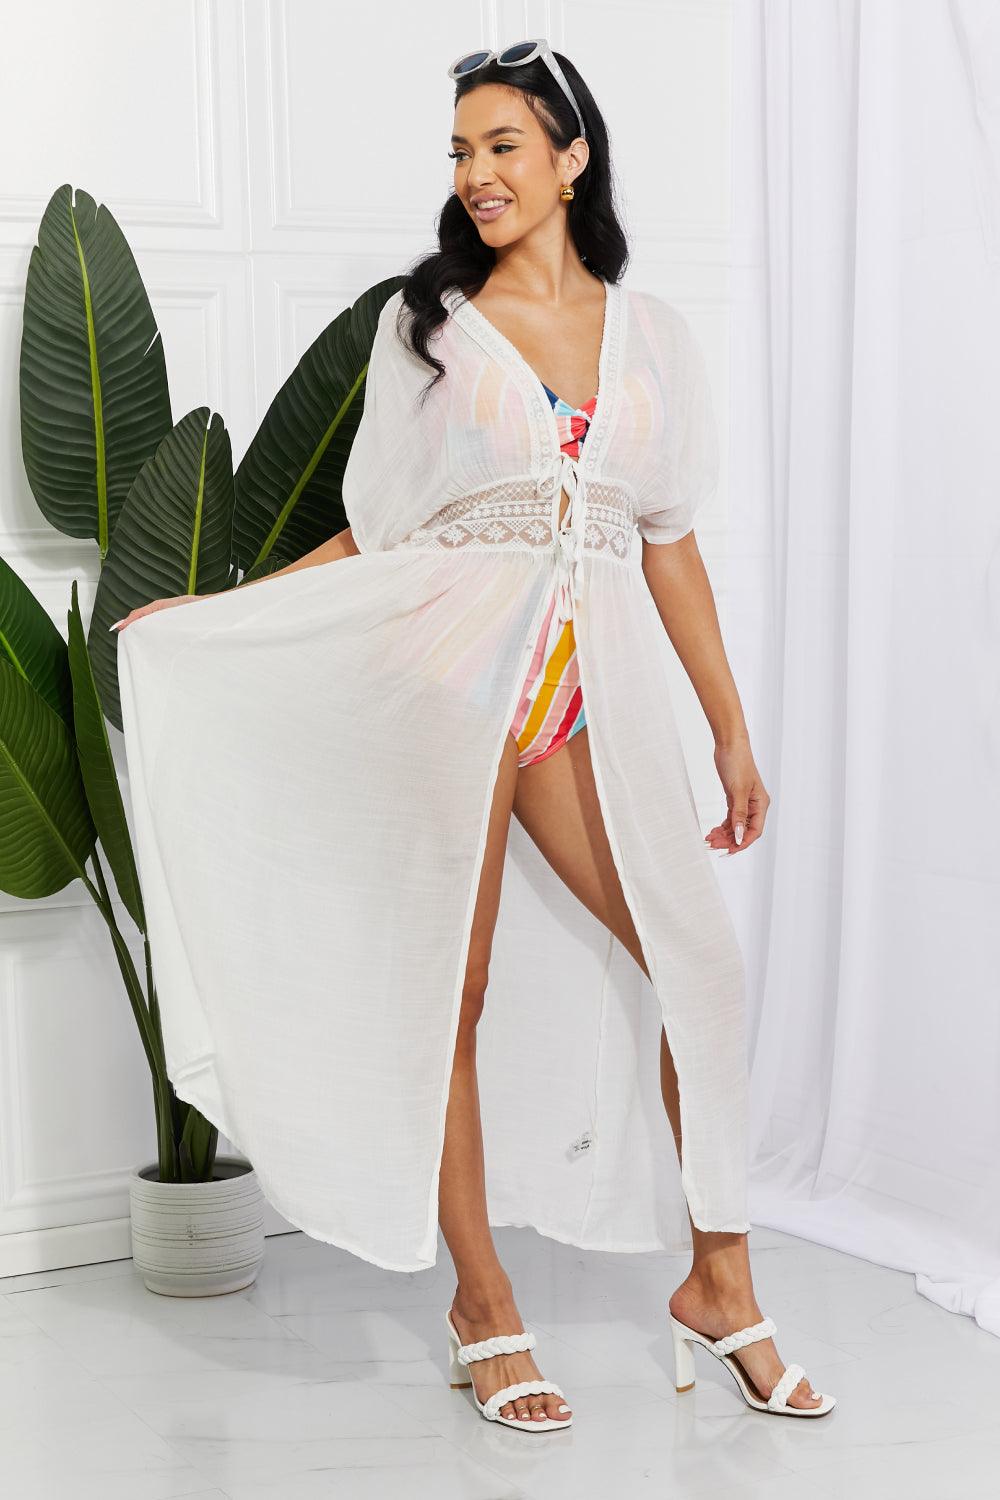 Marina West Swim Sun Goddess Tied Maxi Cover-Up - God's Girl Gifts And Apparel